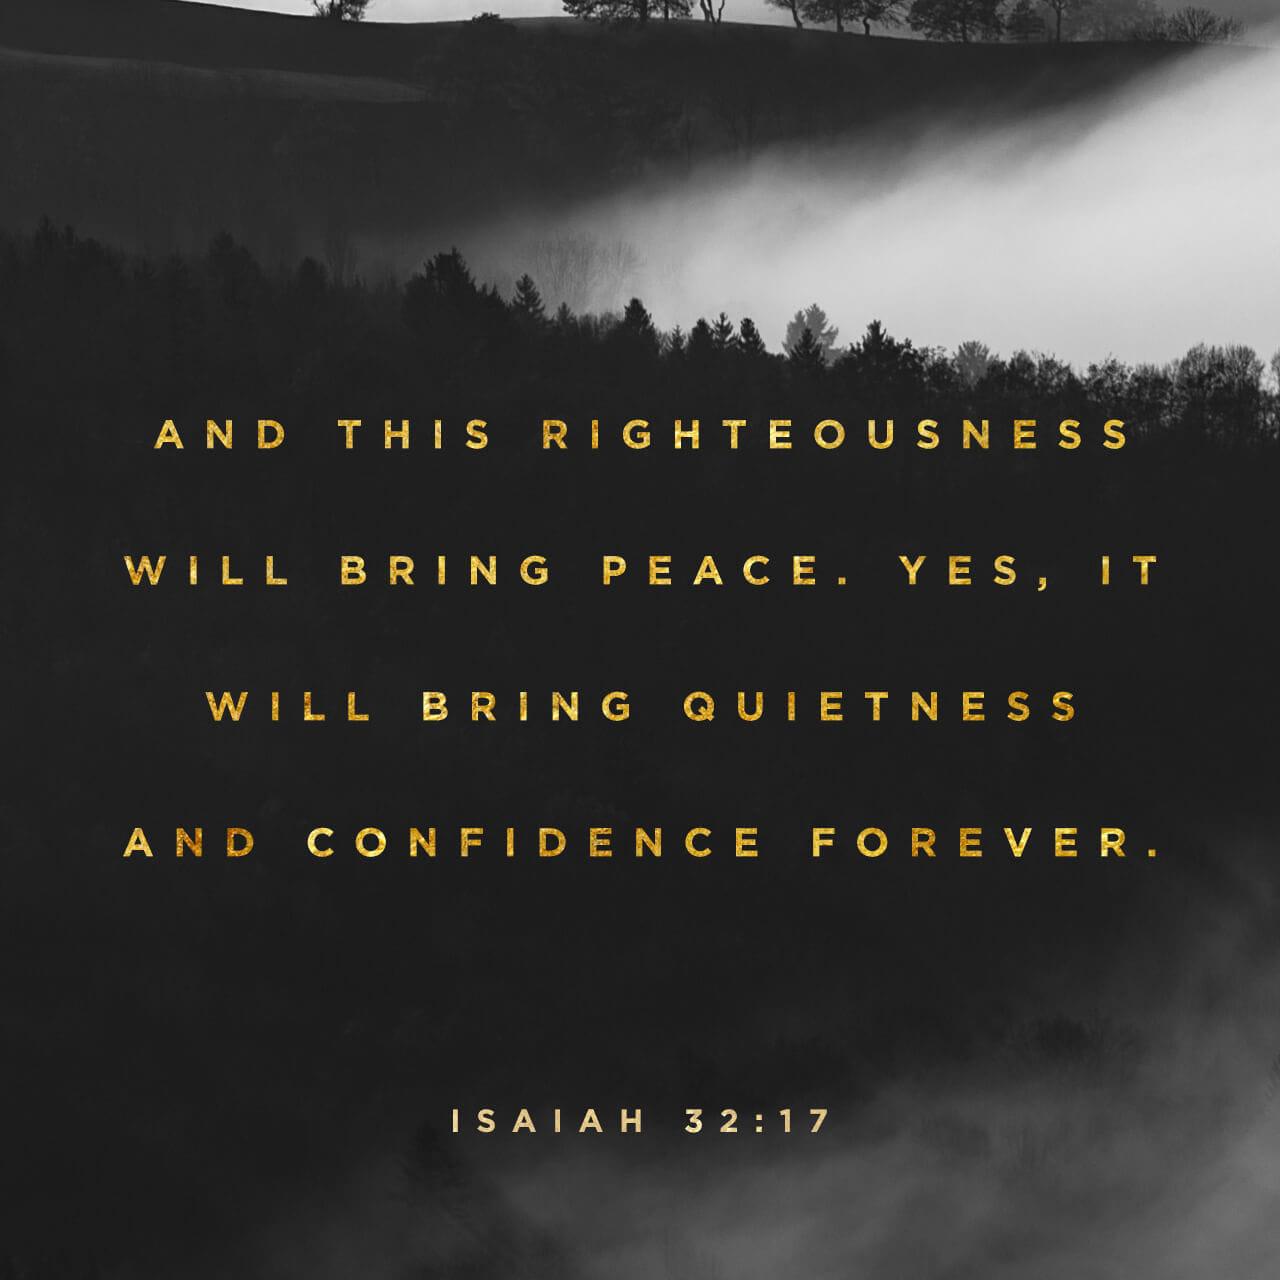 Bible Verse of the Day - day 86 - image 577 (Isaiah 32:1-20)